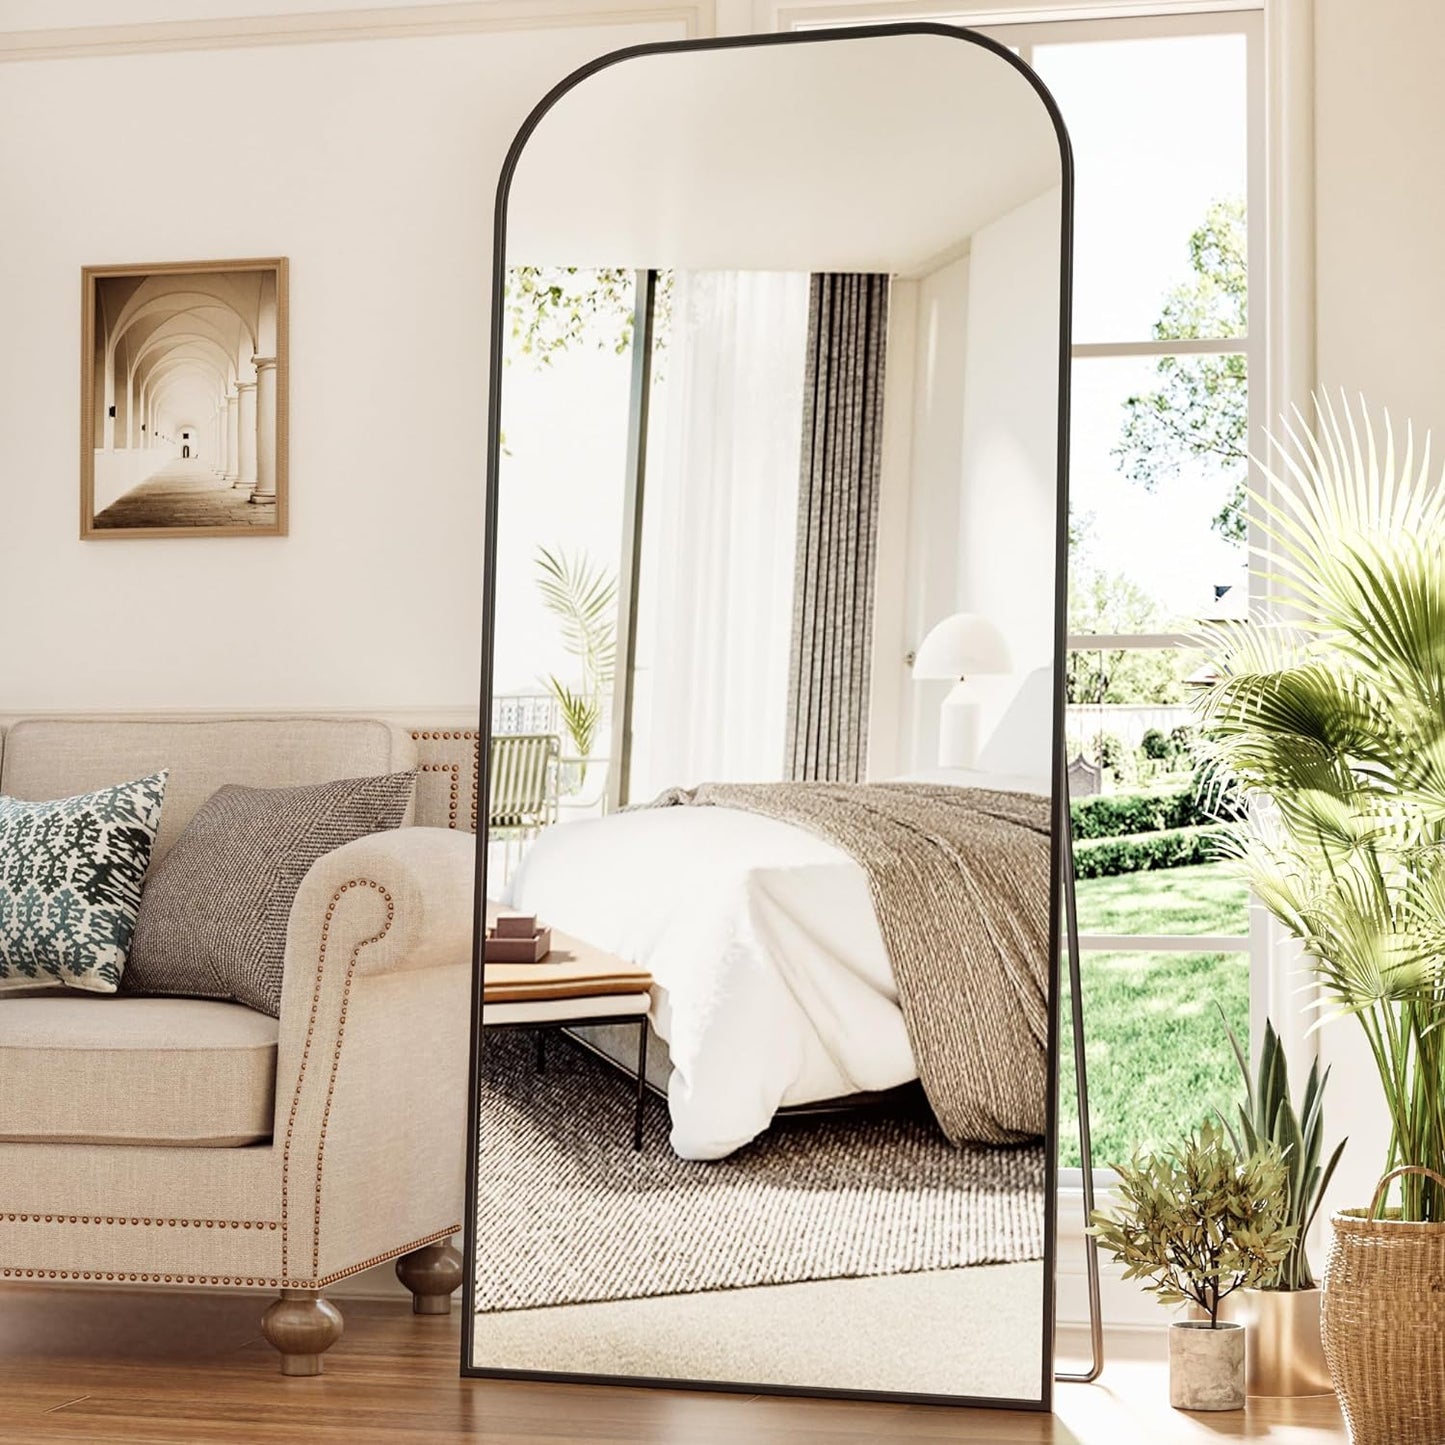 Full Length Mirror, 71"X28" Oversized Floor Mirror Freestanding, Arched Floor Standing Large Mirror Full Body Mirror with Stand for Bedroom, Hanging Mounted Mirror for Living Room, Black - Design By Technique